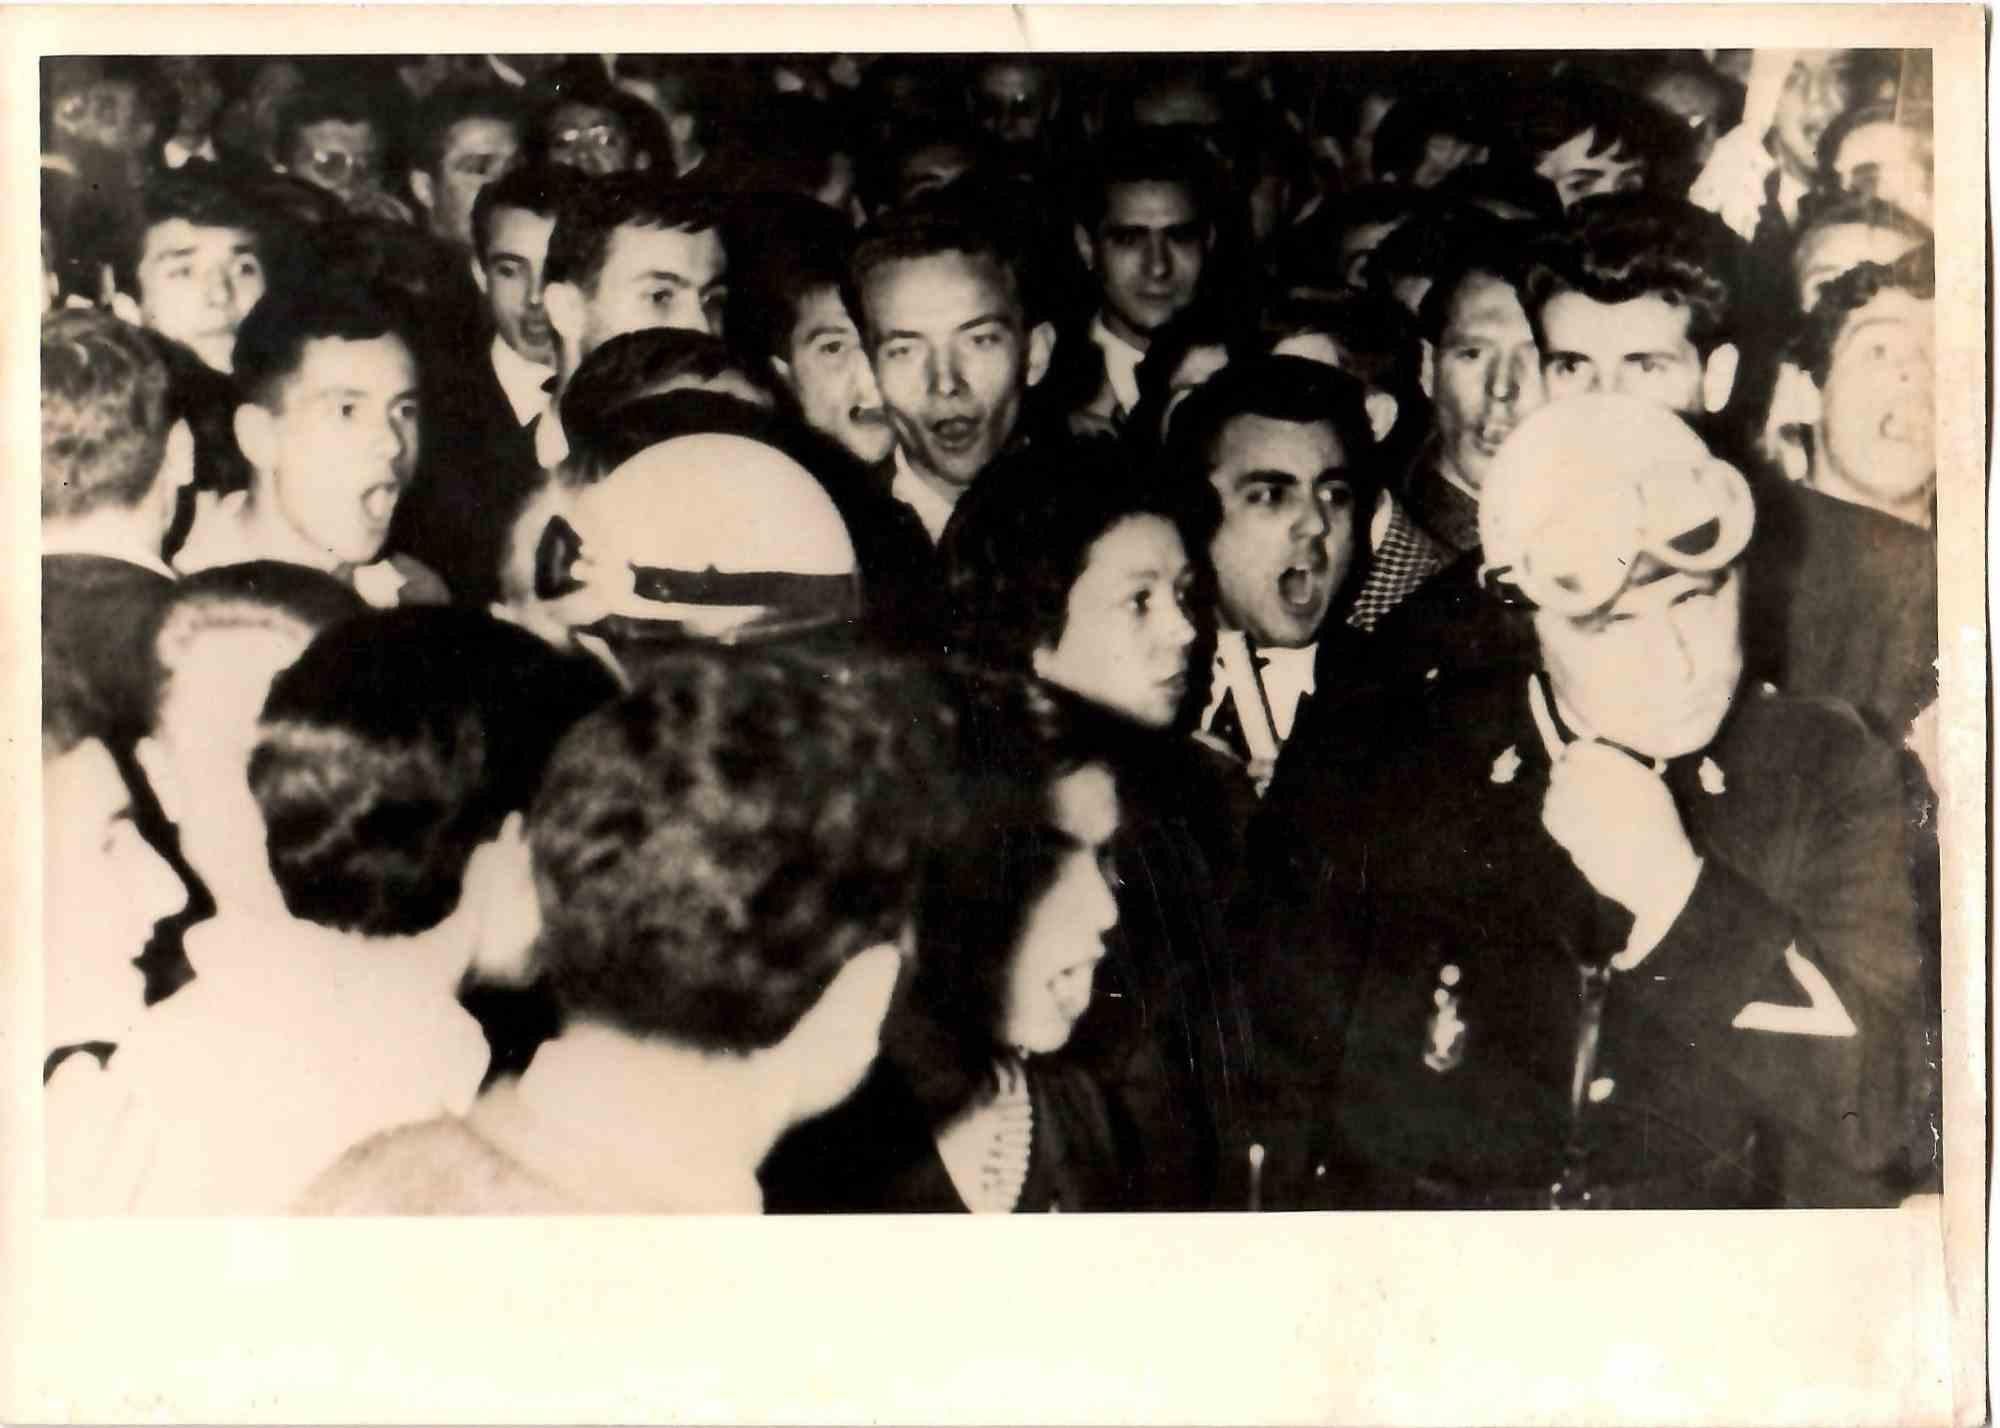 Unknown Black and White Photograph - The Crowd Behind the Policemen, Algeria - Vintage Photograph - Mid-20th Century